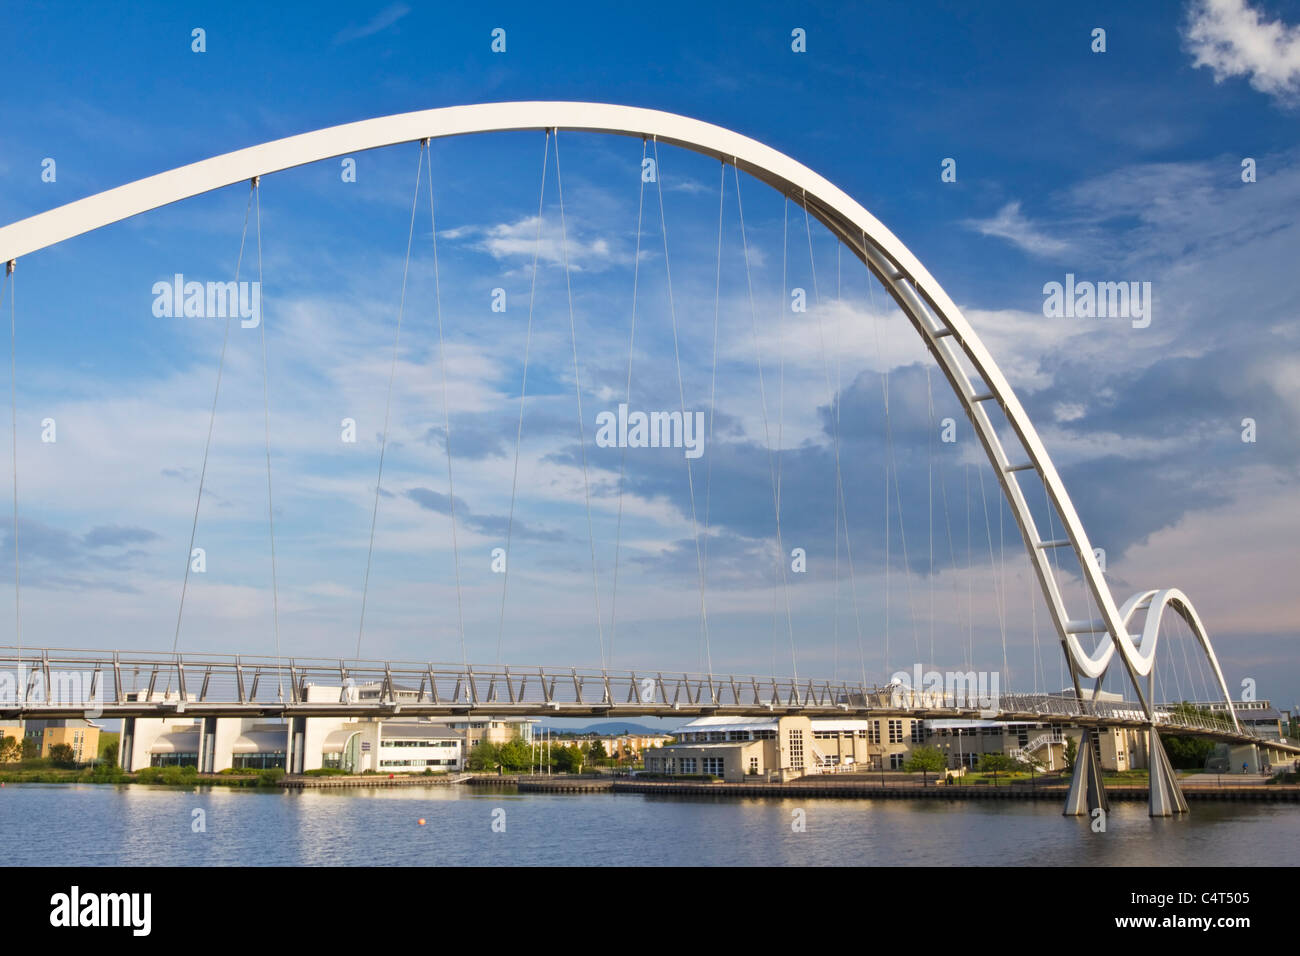 The 'Infinity' Bridge, a pedestrian crossing over the River Tees, Stockton on Tees, England Stock Photo